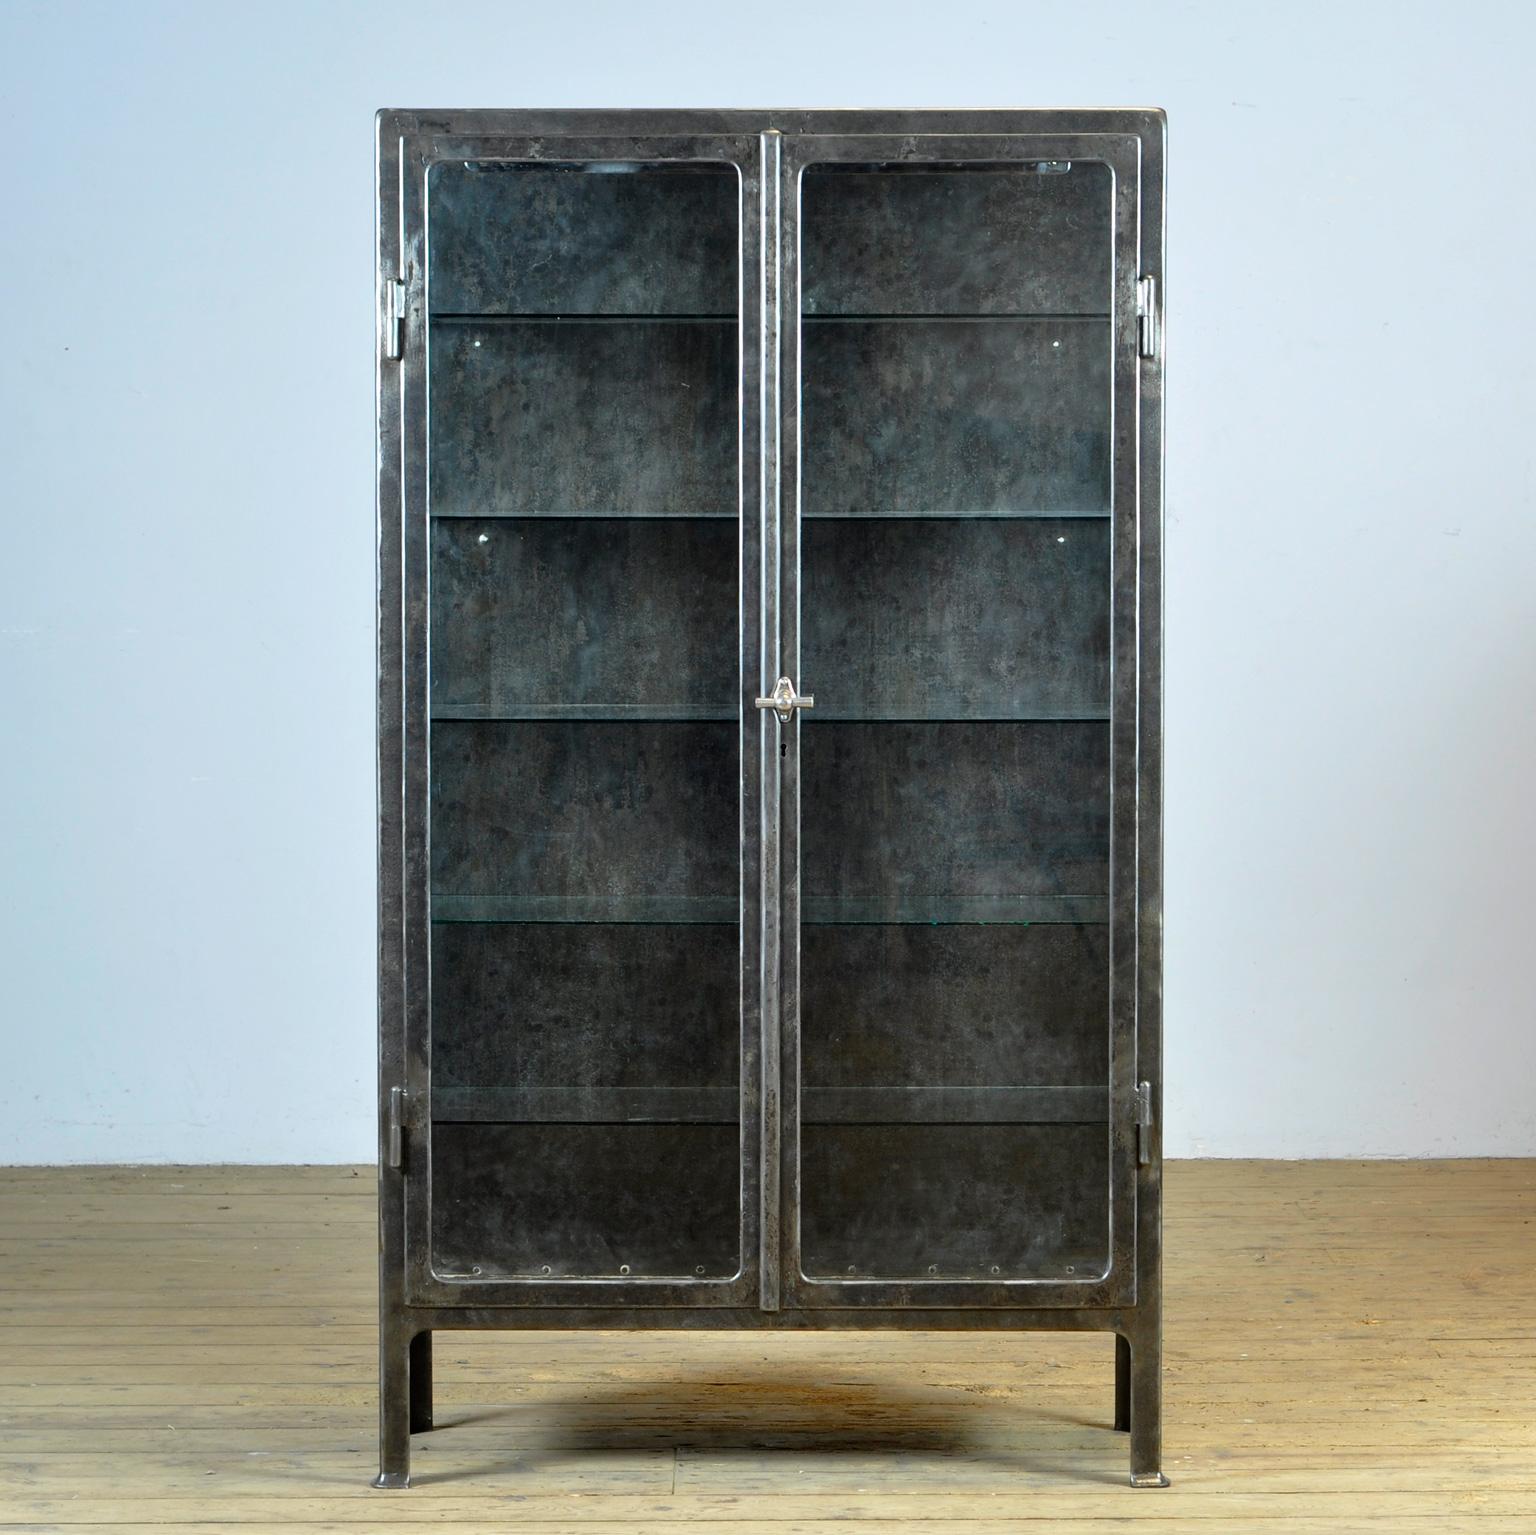 Riveted heavy iron cabinet with the original lock and handle, made around 1920. The cabinet has been stripped to the metal and treated against rust. The cabinet was probably used in a laboratory or hospital. On the inside, the cupboard has an enamel